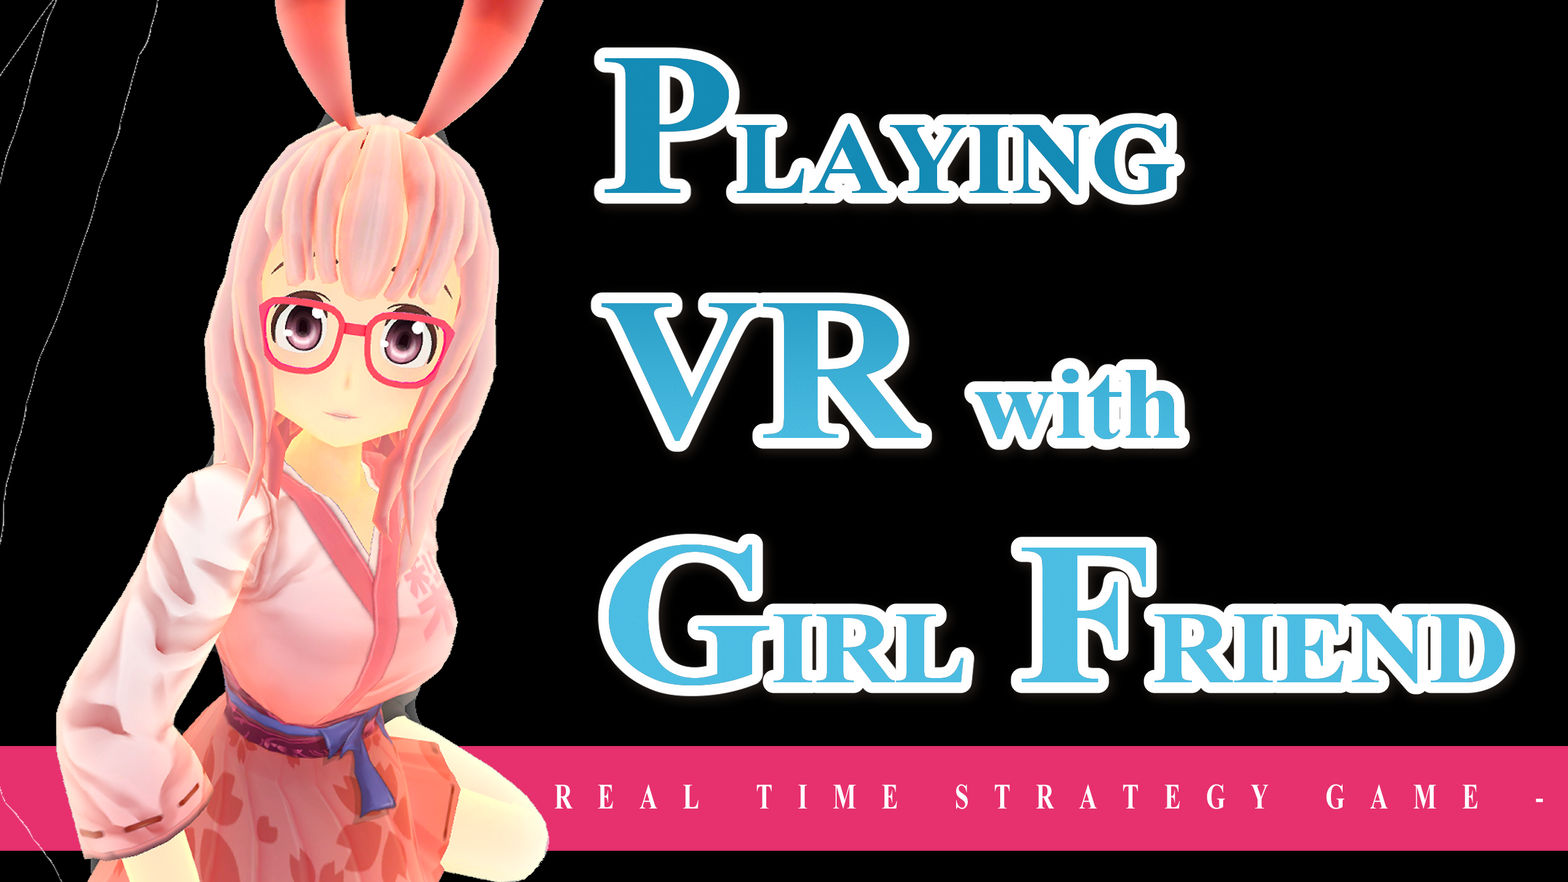 Playing VR with Girl Friend